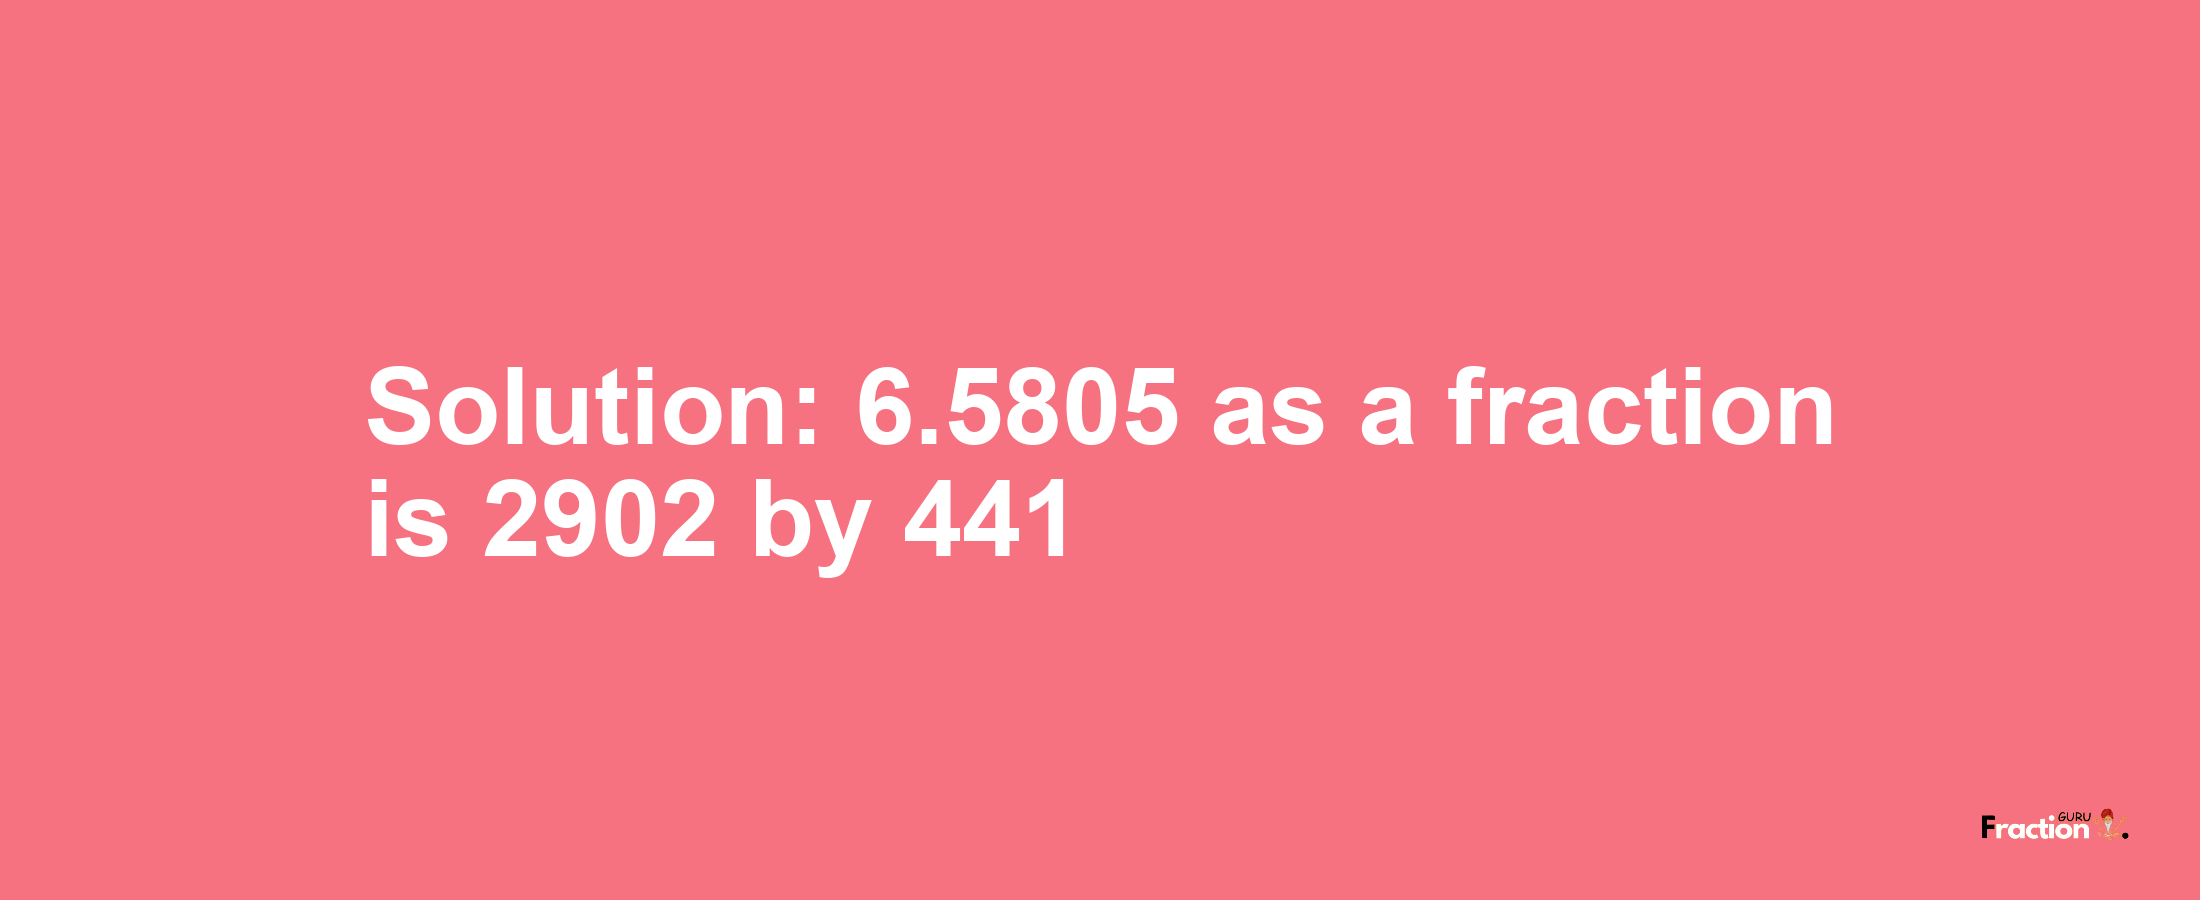 Solution:6.5805 as a fraction is 2902/441